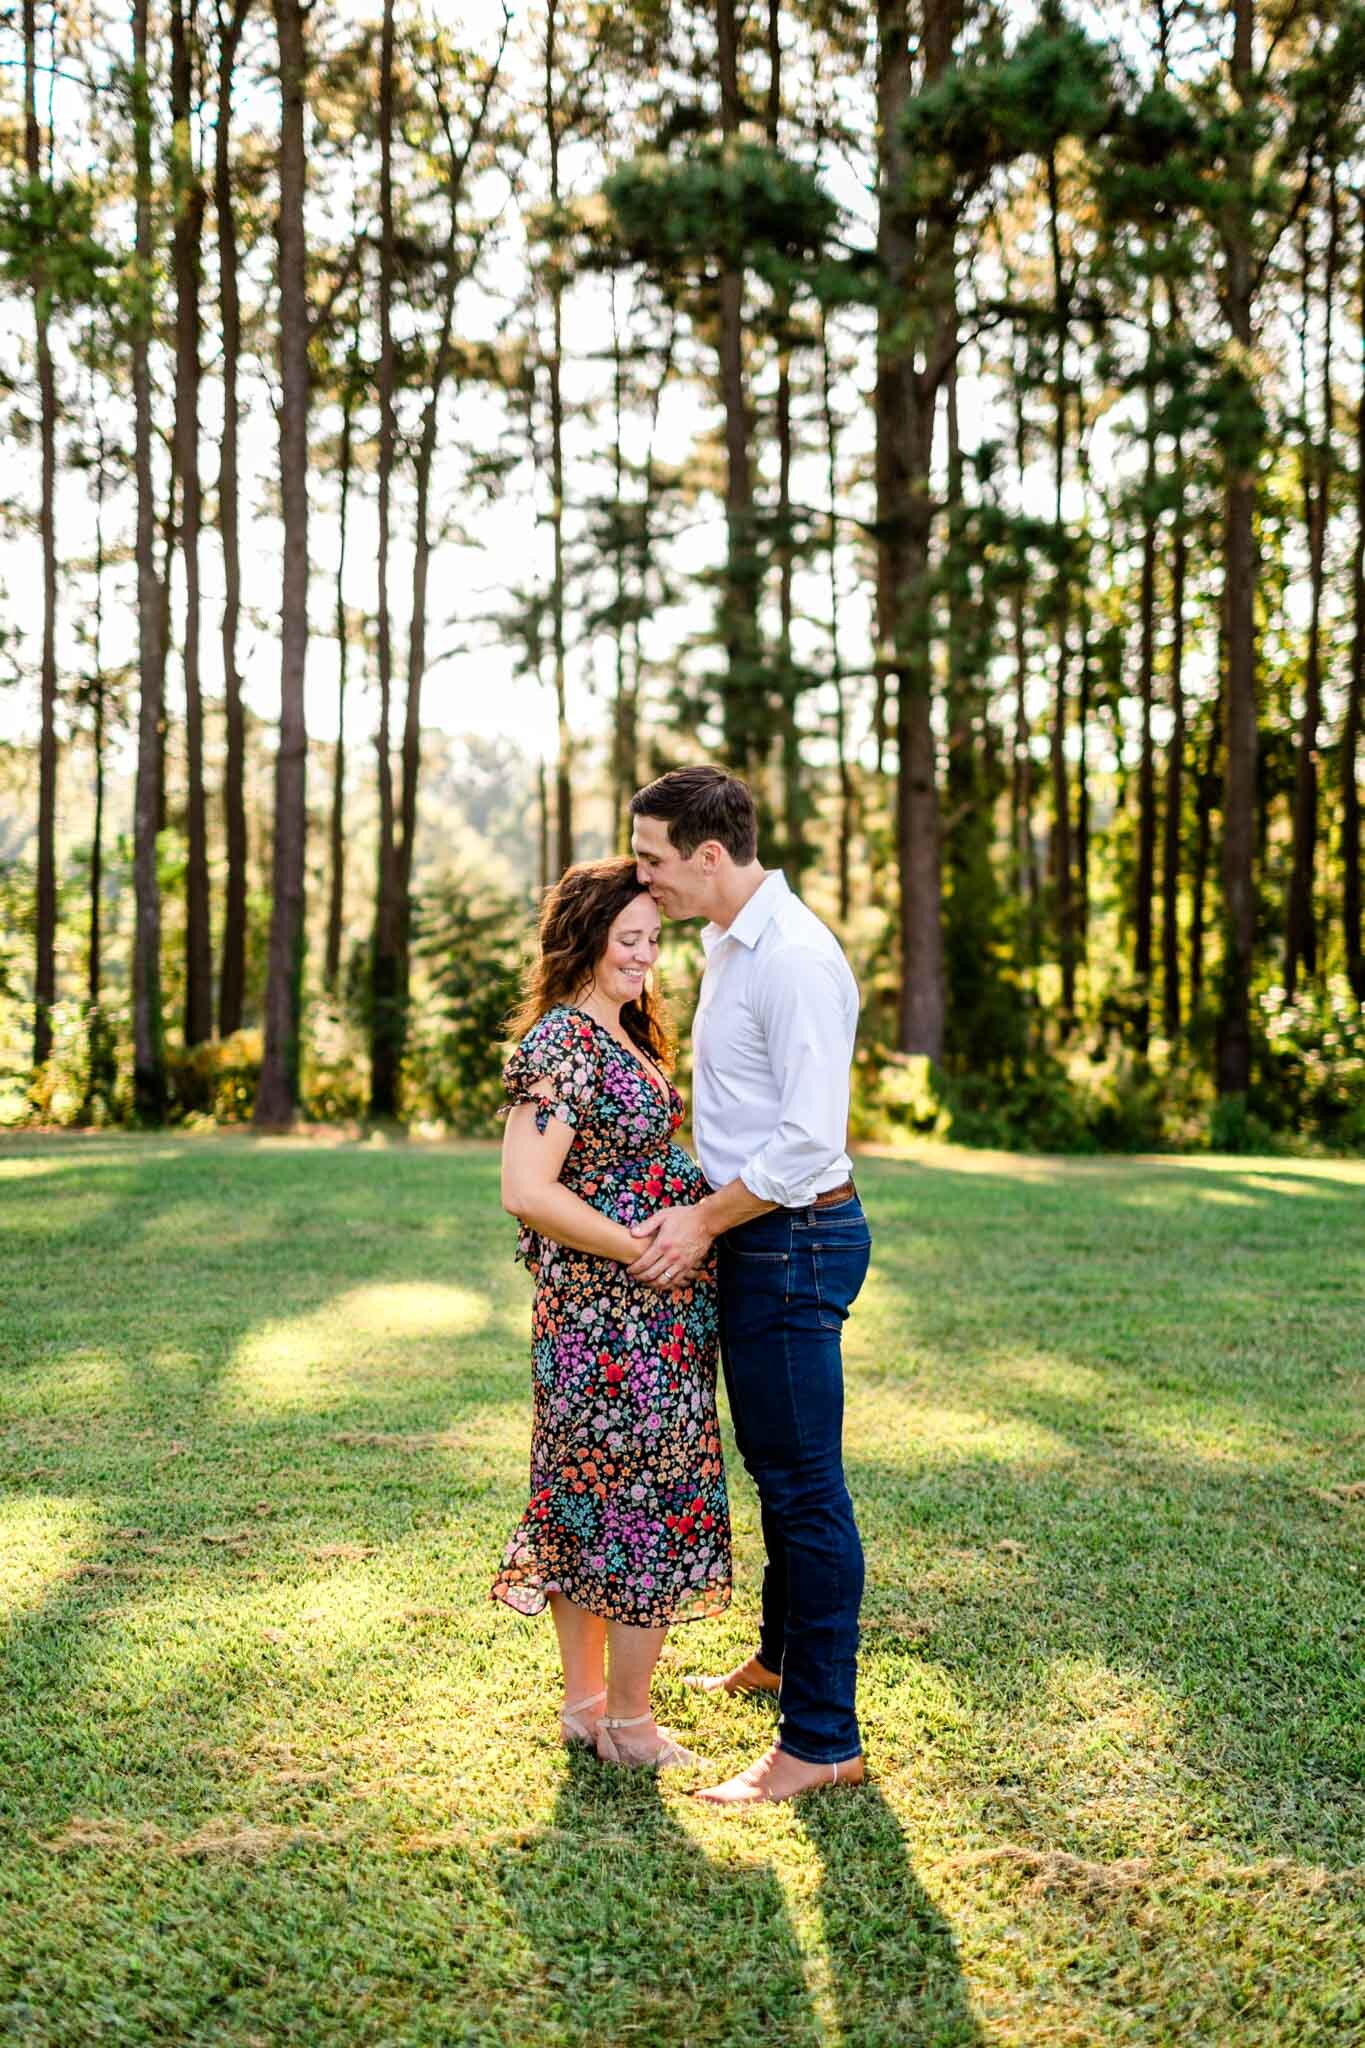 Raleigh Maternity Photographer | Dix Park | By G. Lin Photography | Beautiful portrait of husband and pregnant wife standing in front of trees